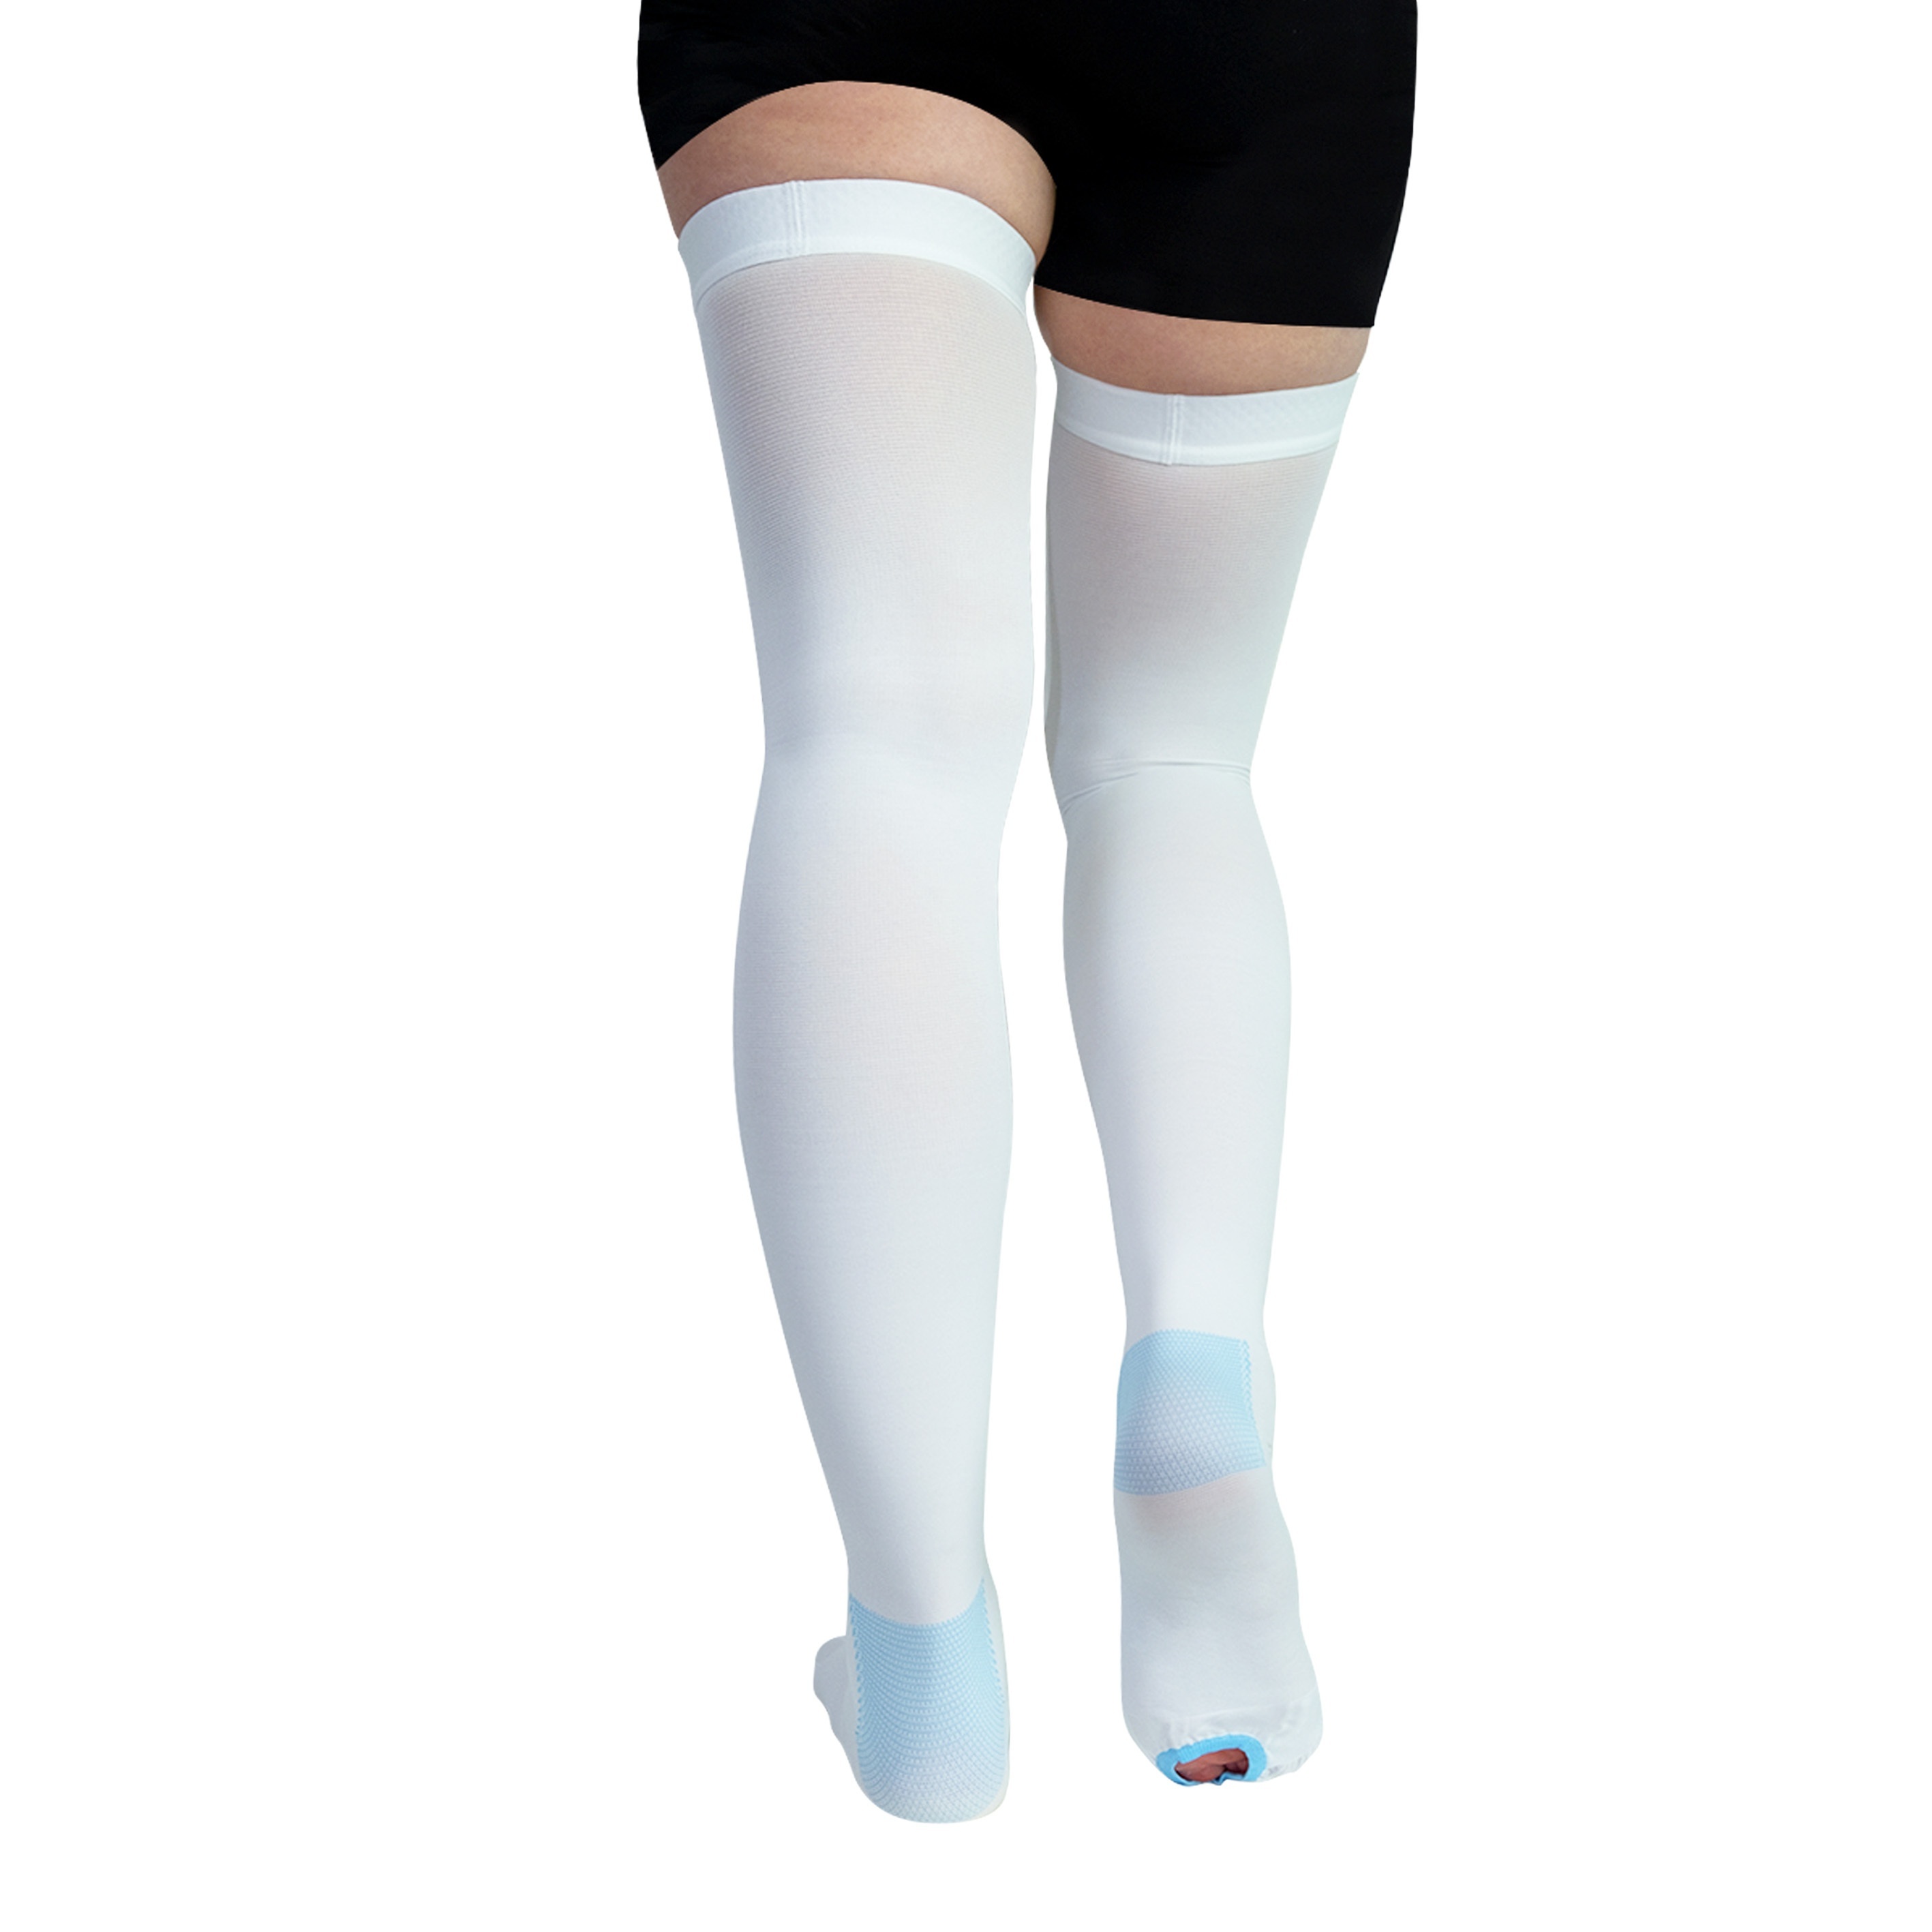 Anti Embolism Compression Stockings, Thigh High Unisex Ted Hose